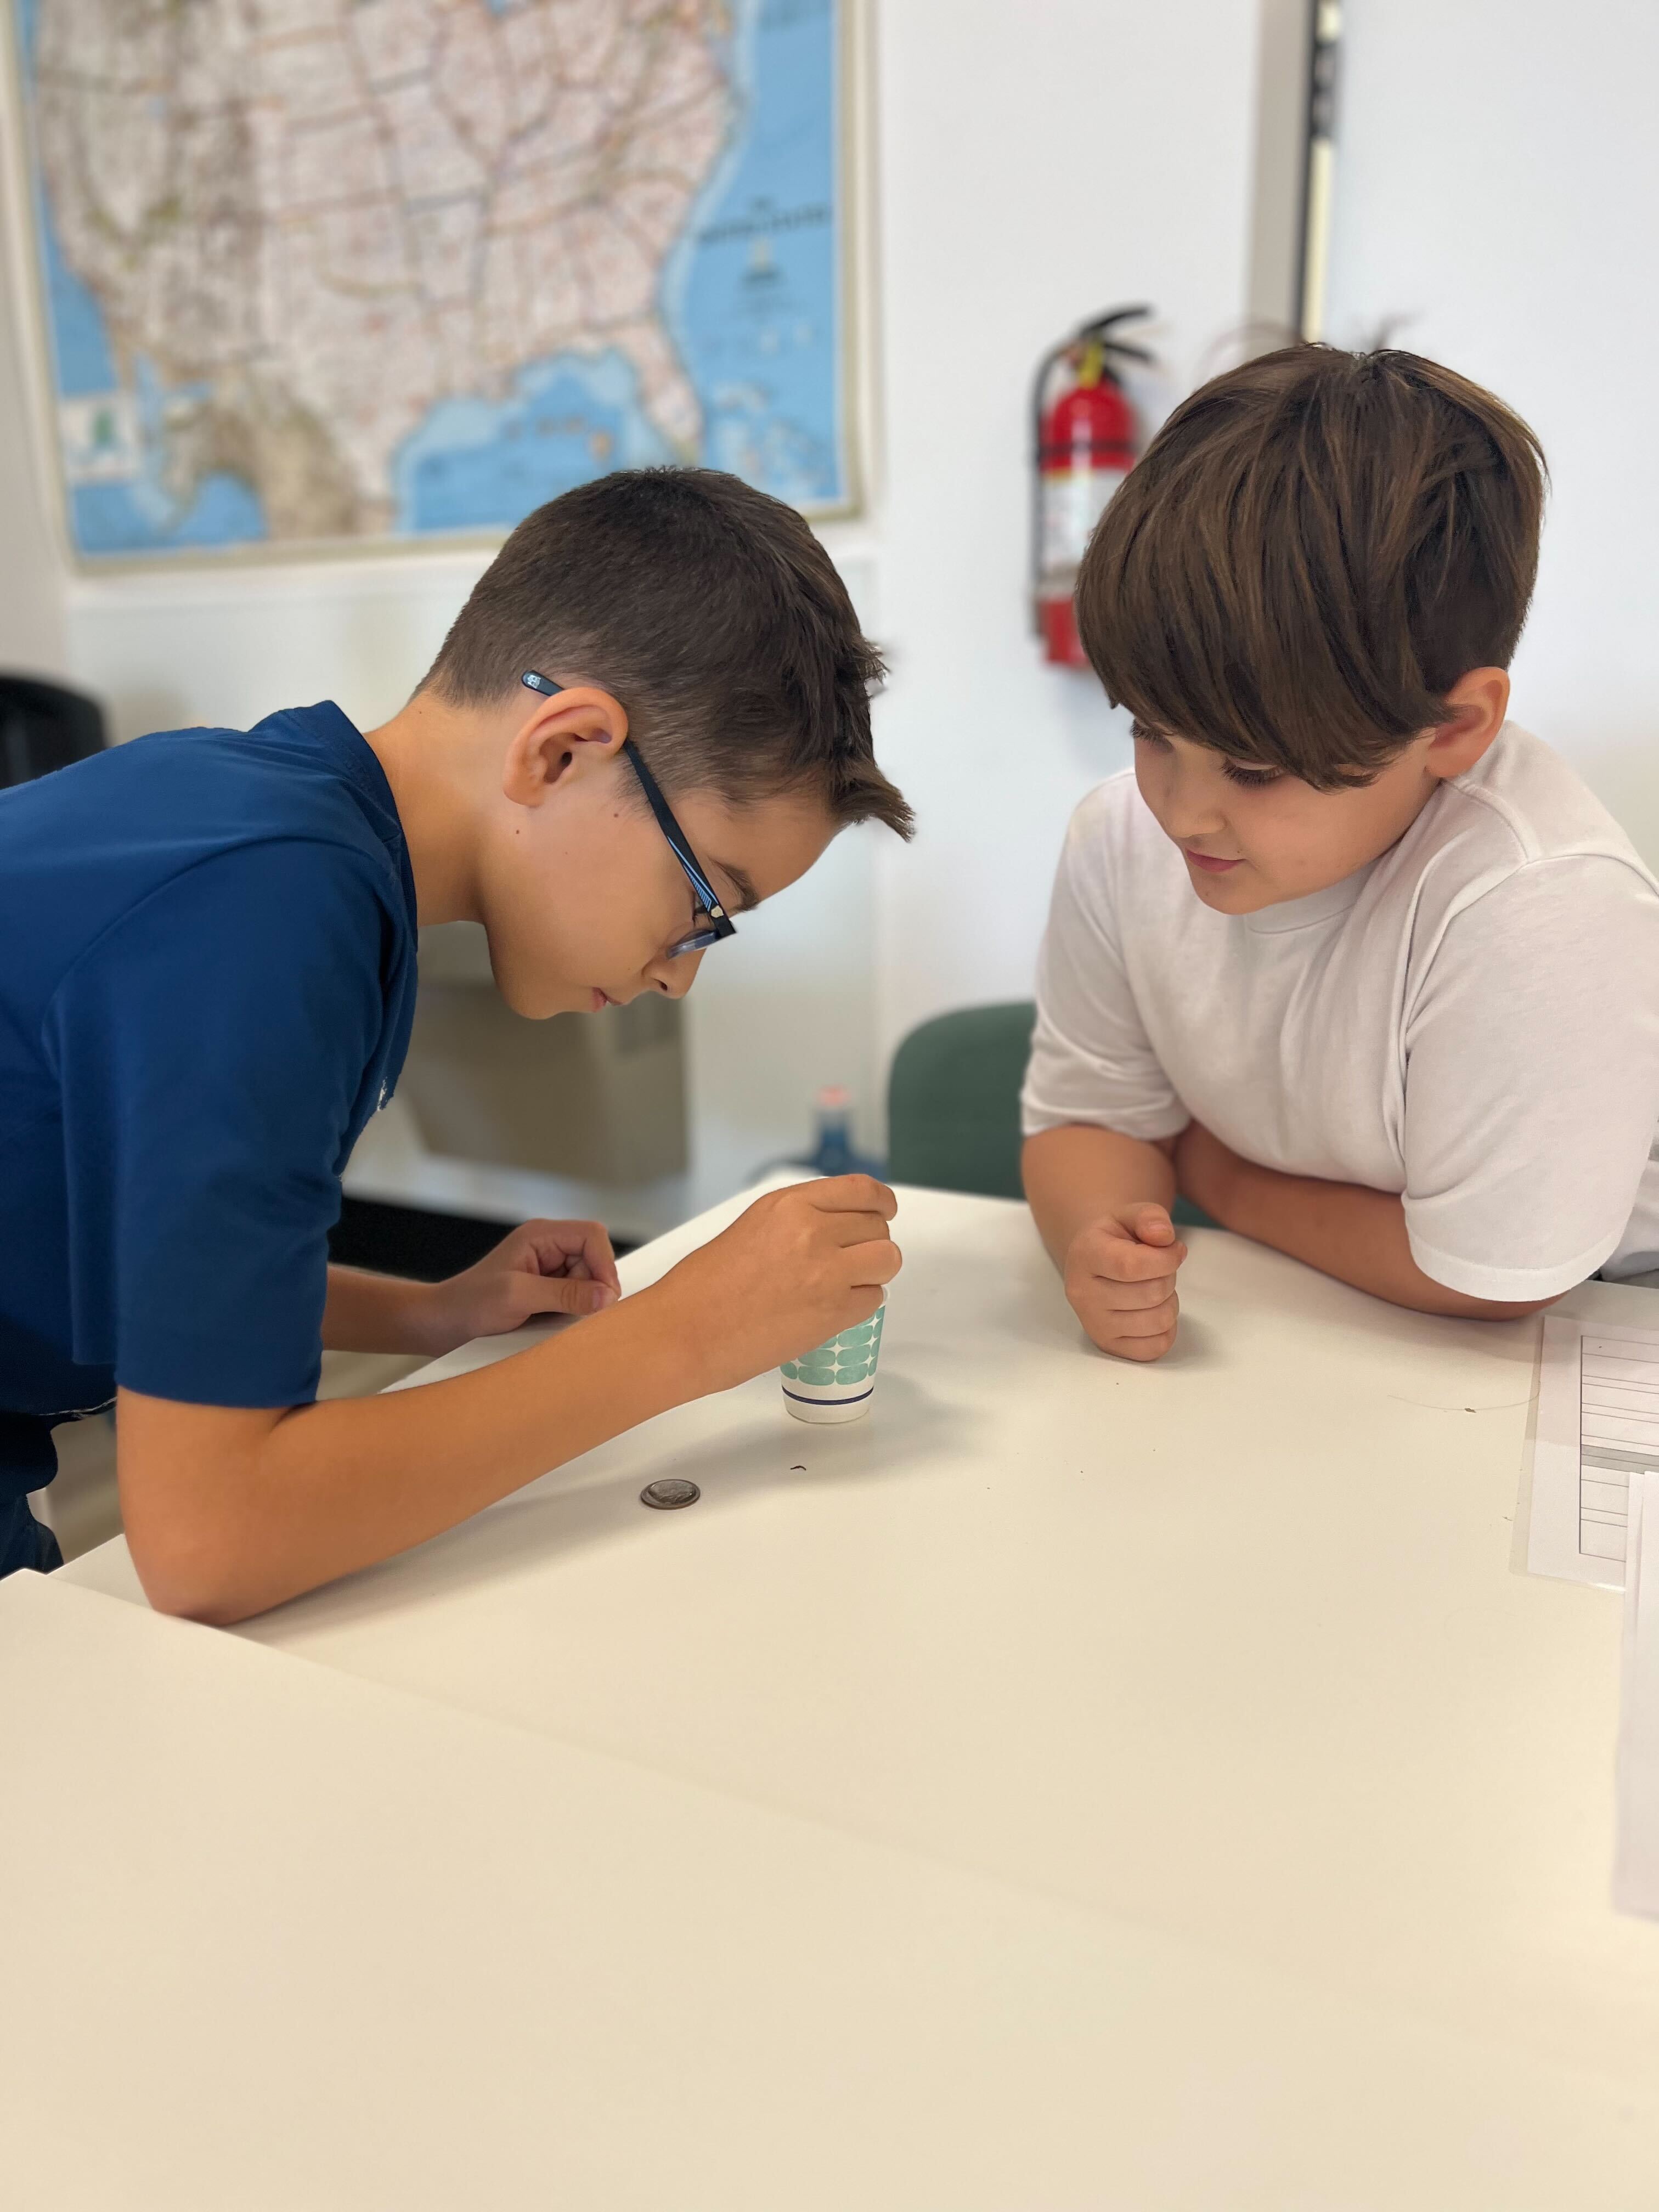 two boys learning together at a micro school